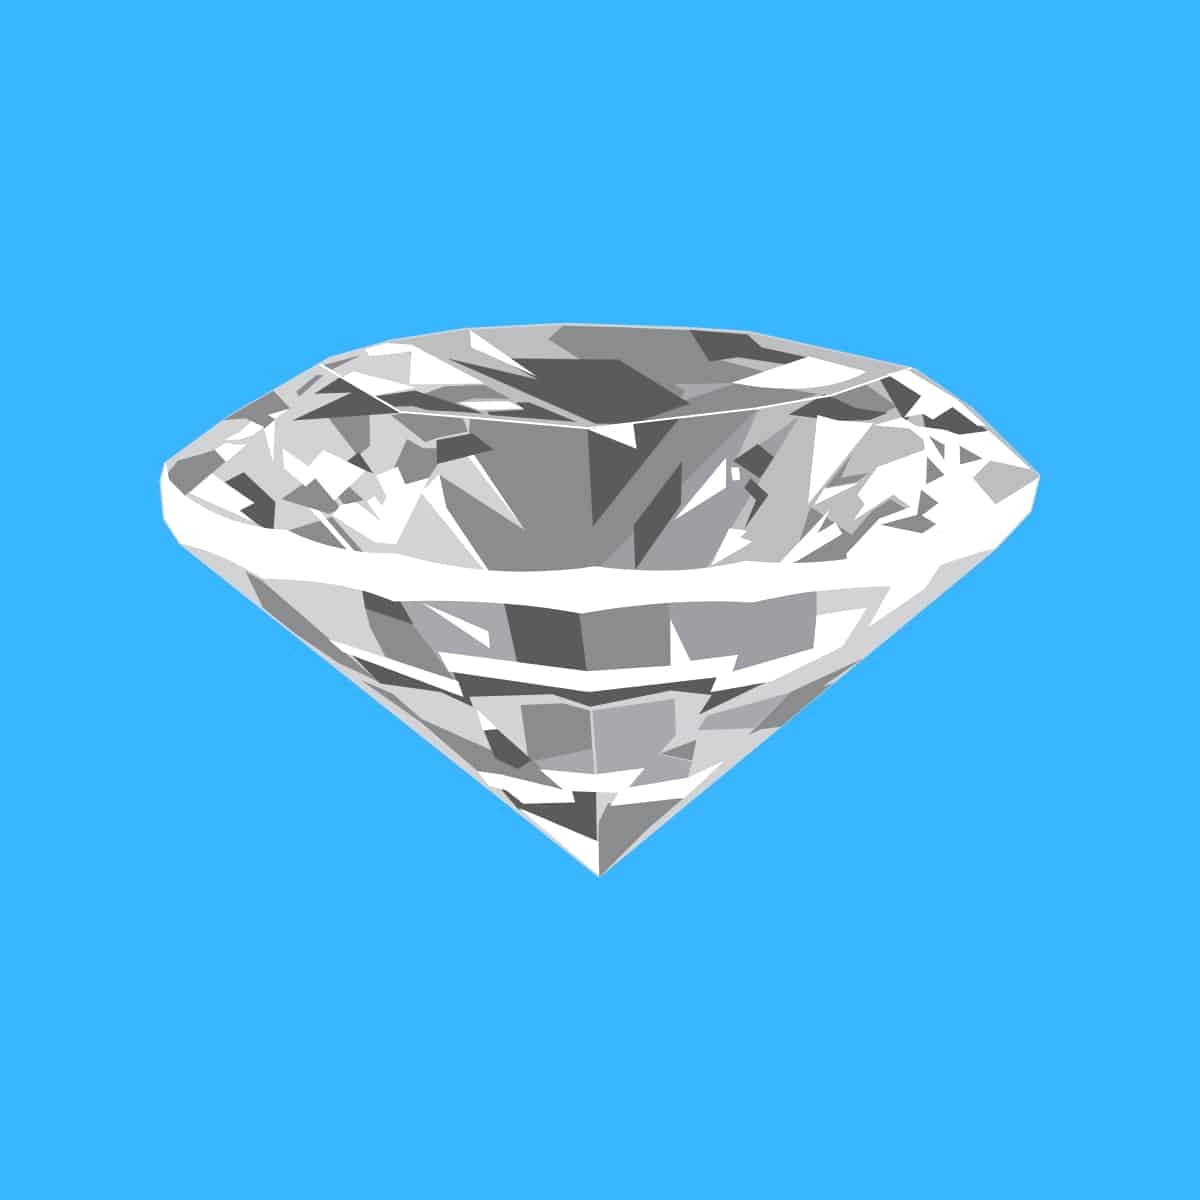 Cartoon graphic of a very large diamond on a blue background.